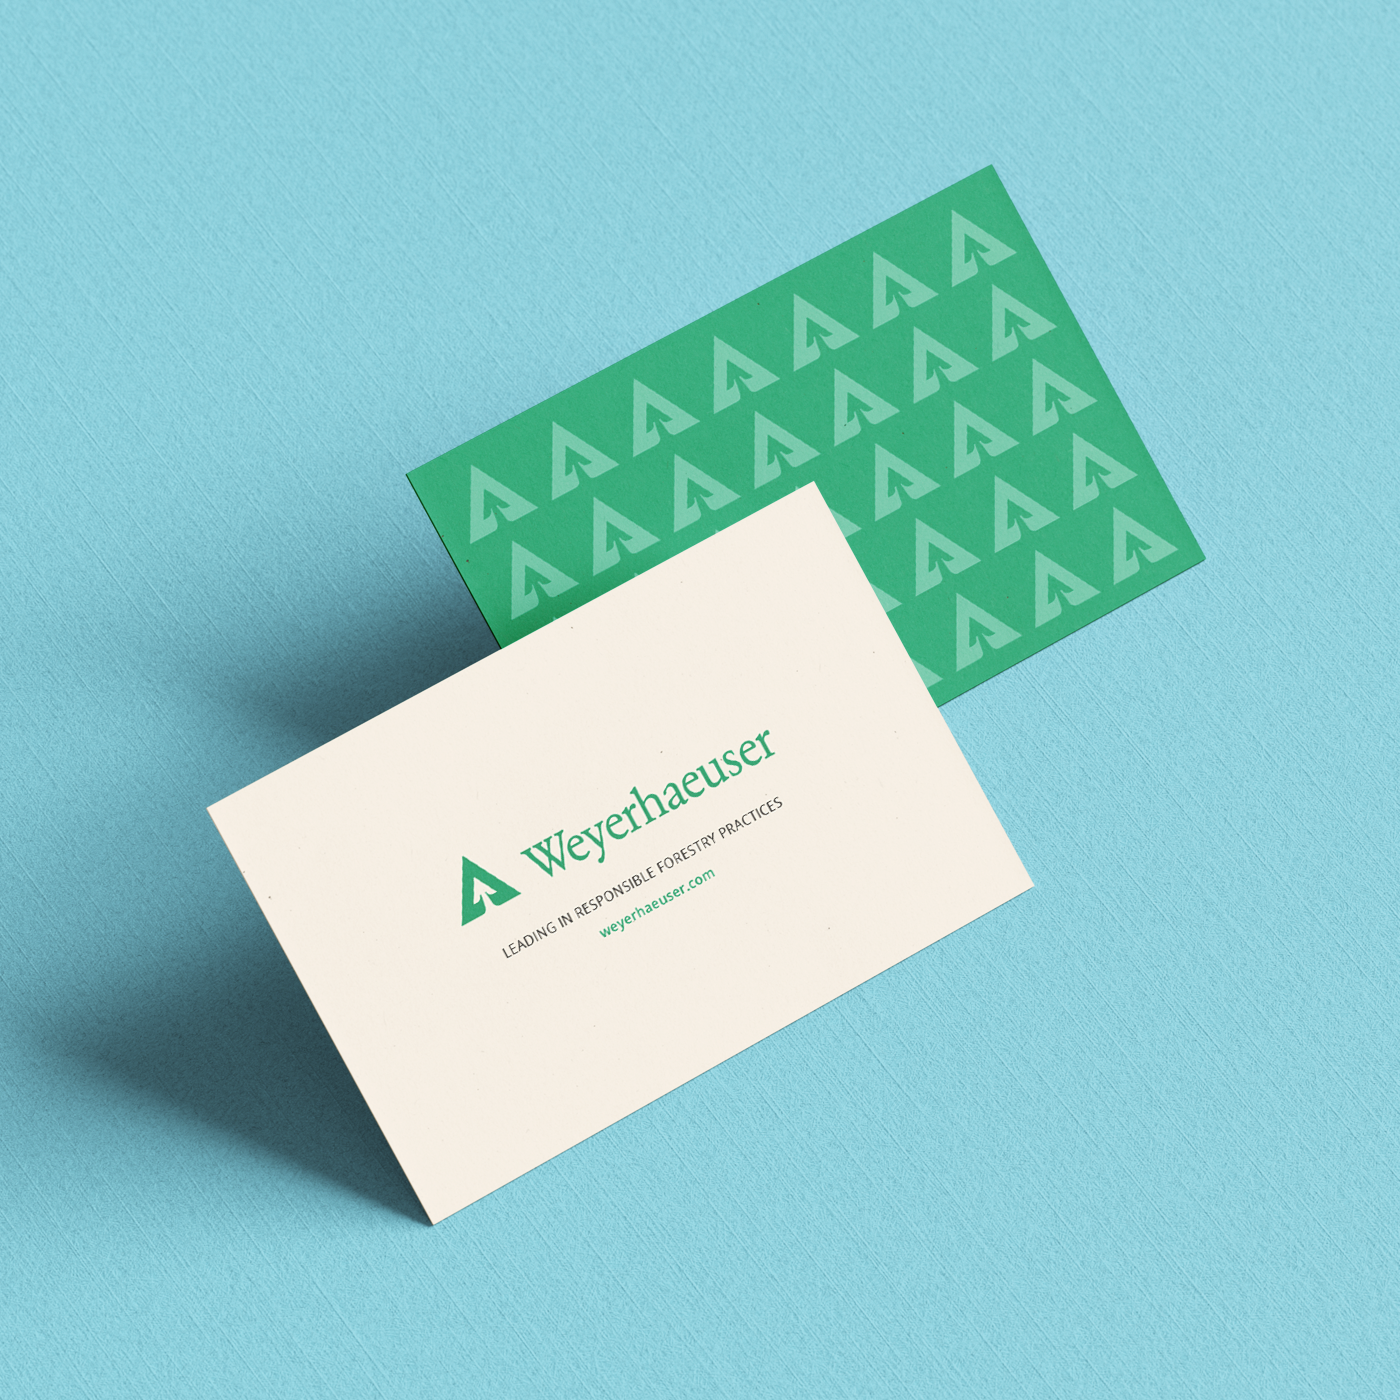 Business card designs for a timber and sustainable forestry manufacturing company.